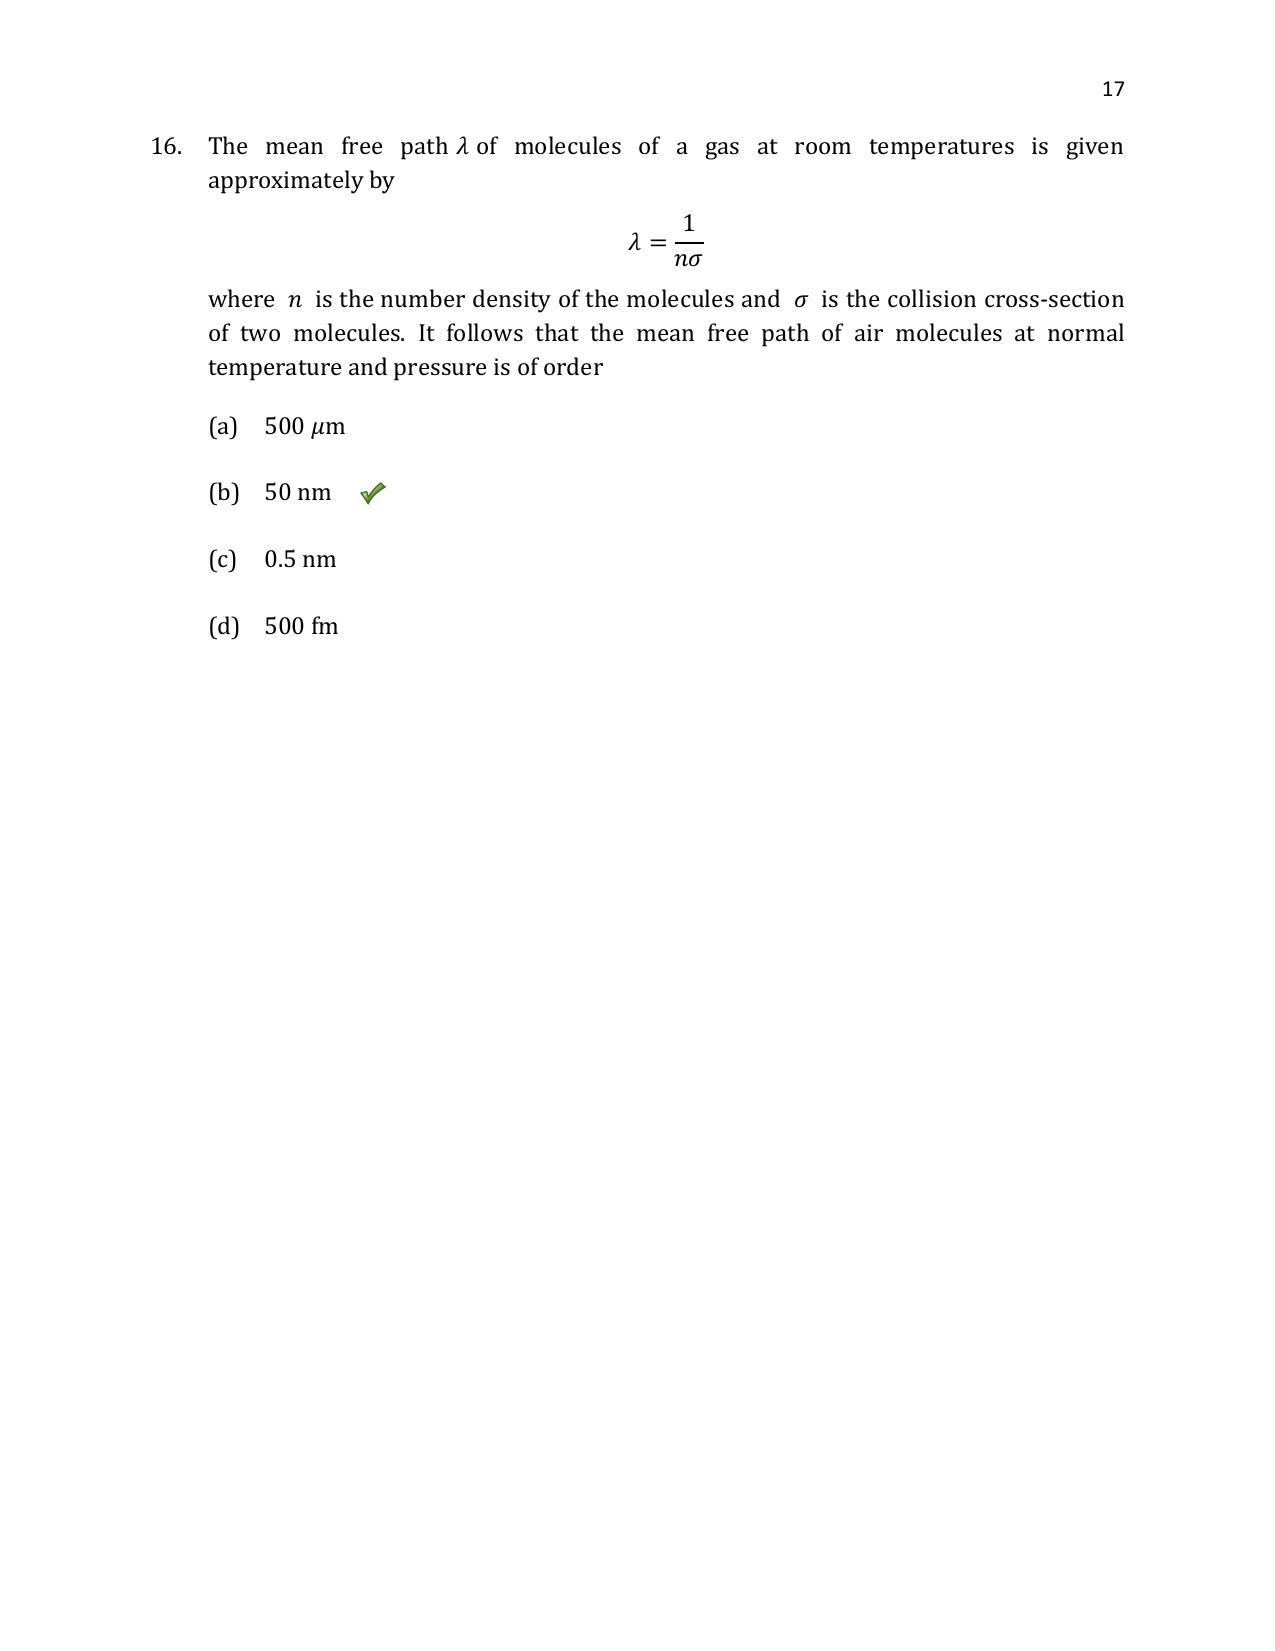 TIFR GS 2020 Physics Question Paper - Page 18